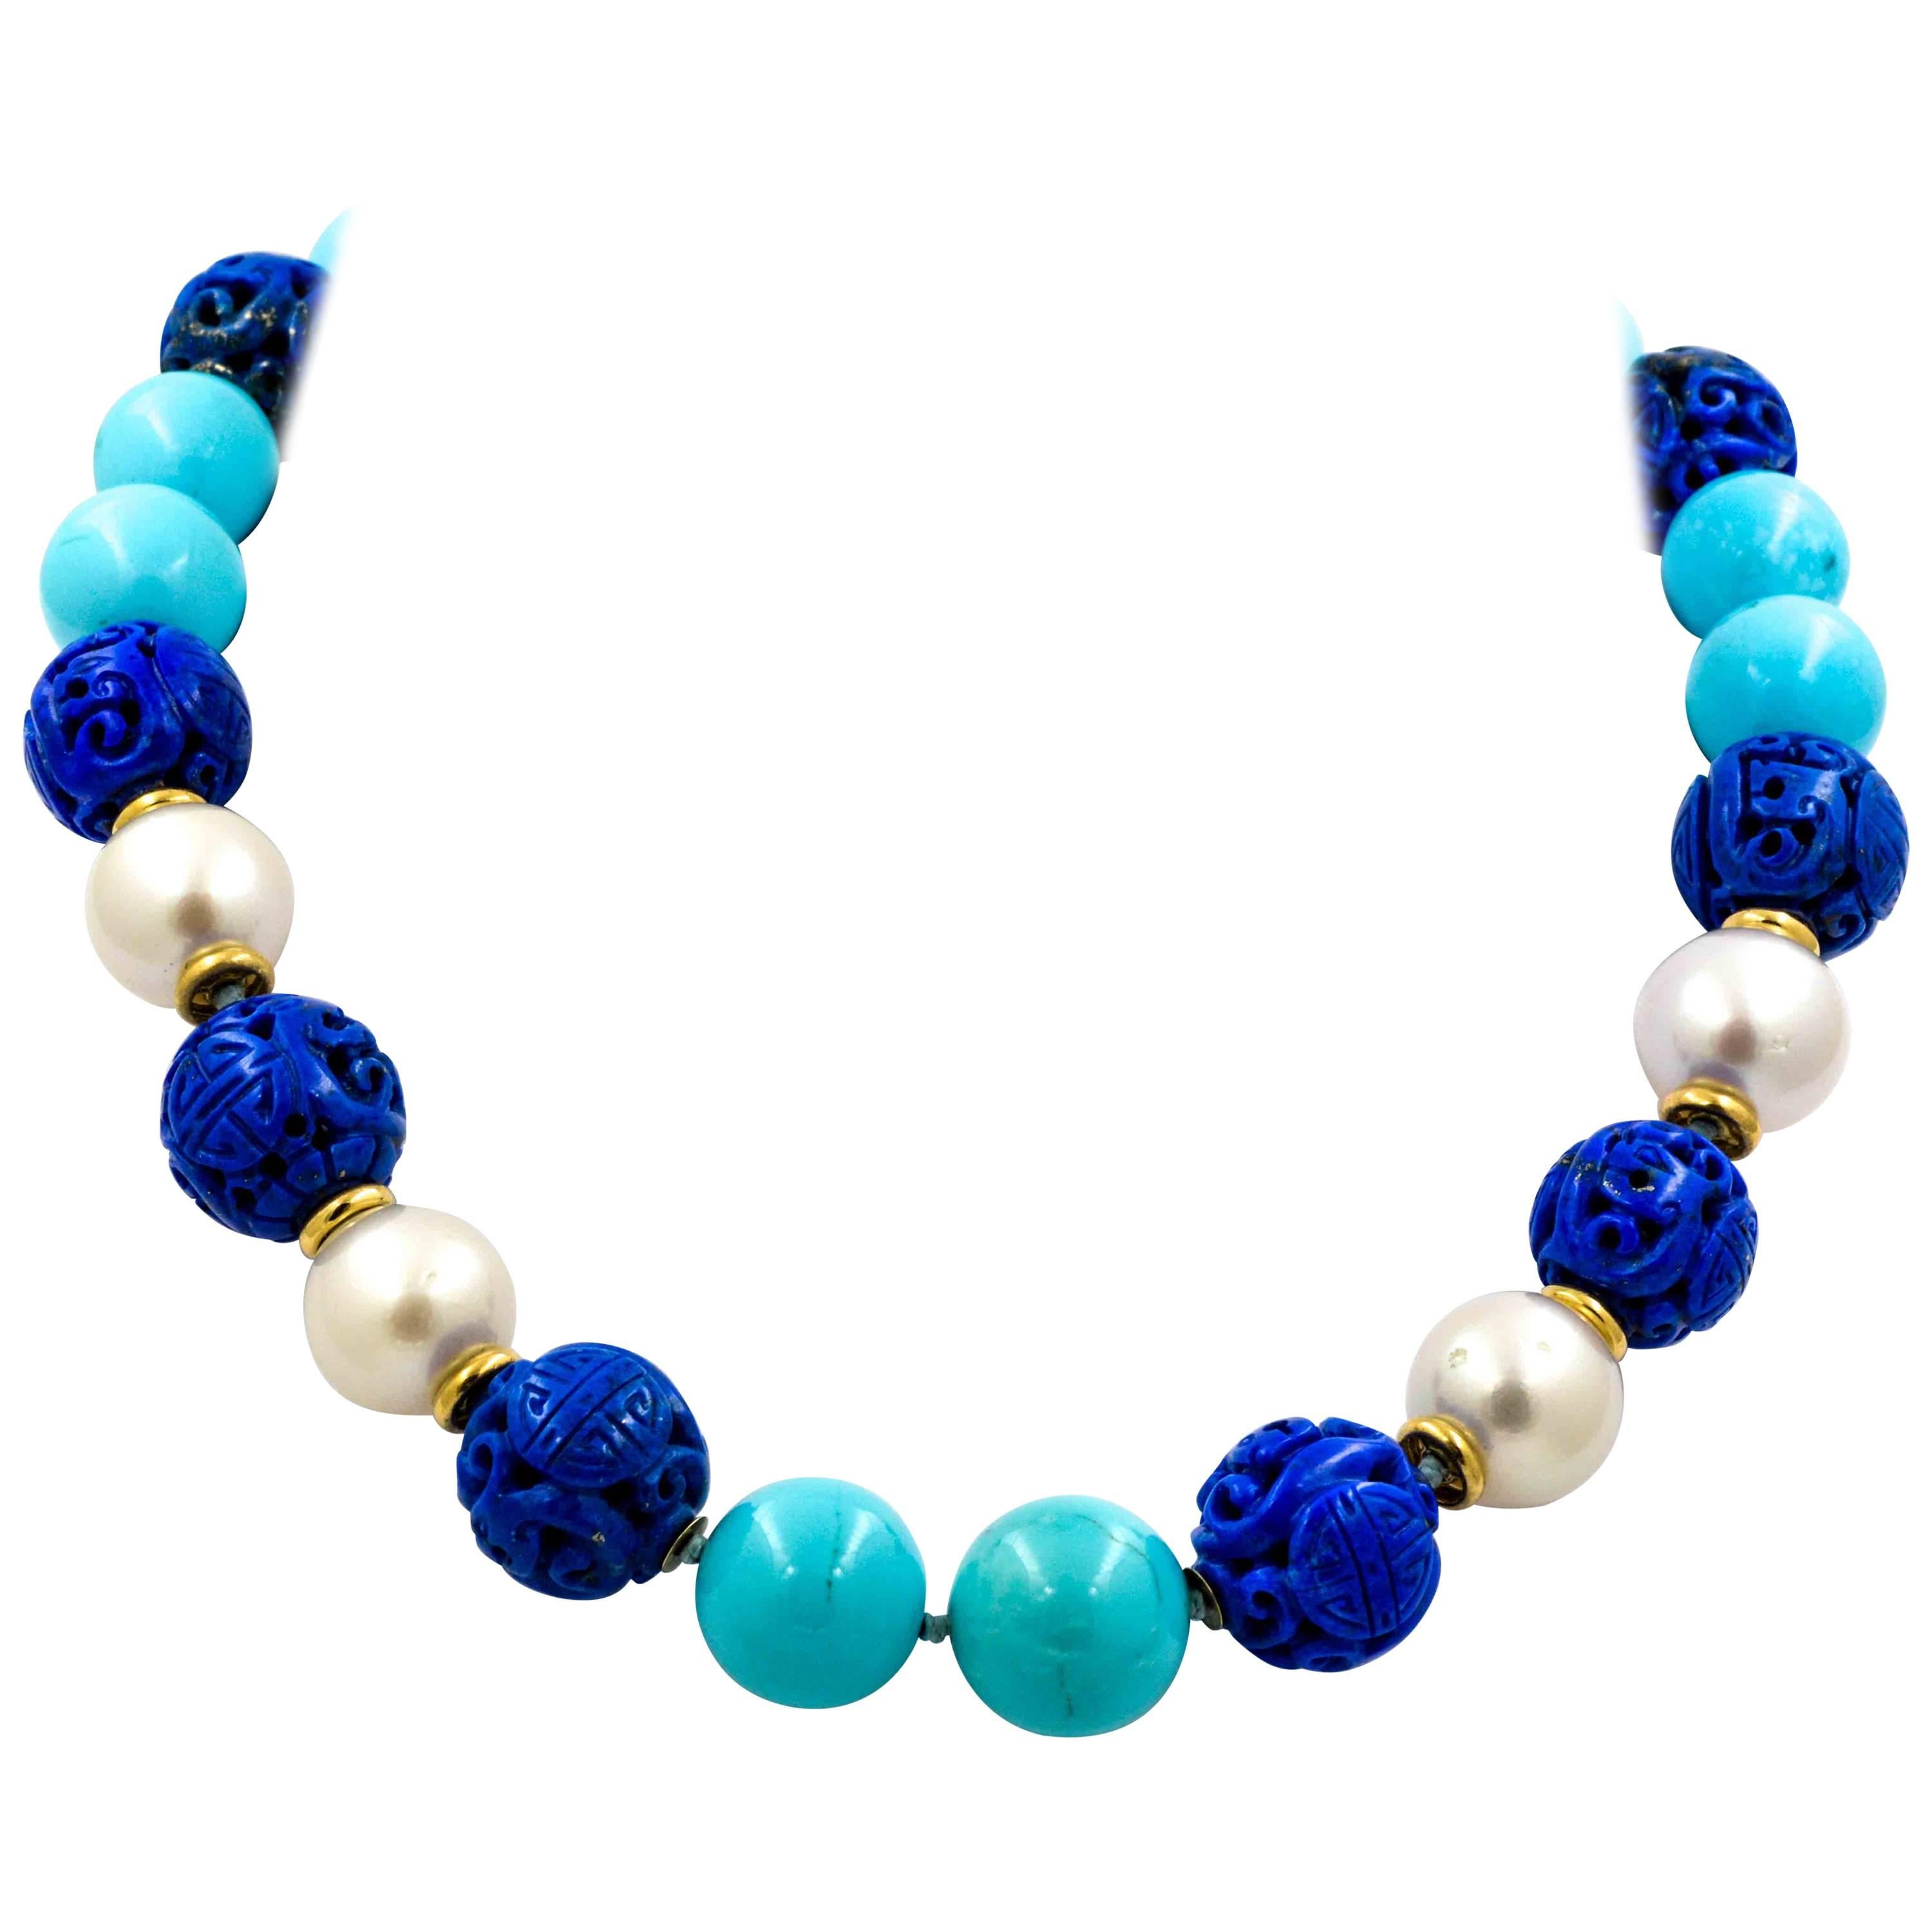 Seaman Schepps Antique Hand Carved Lapis Turquoise Cultured Pearl Necklace